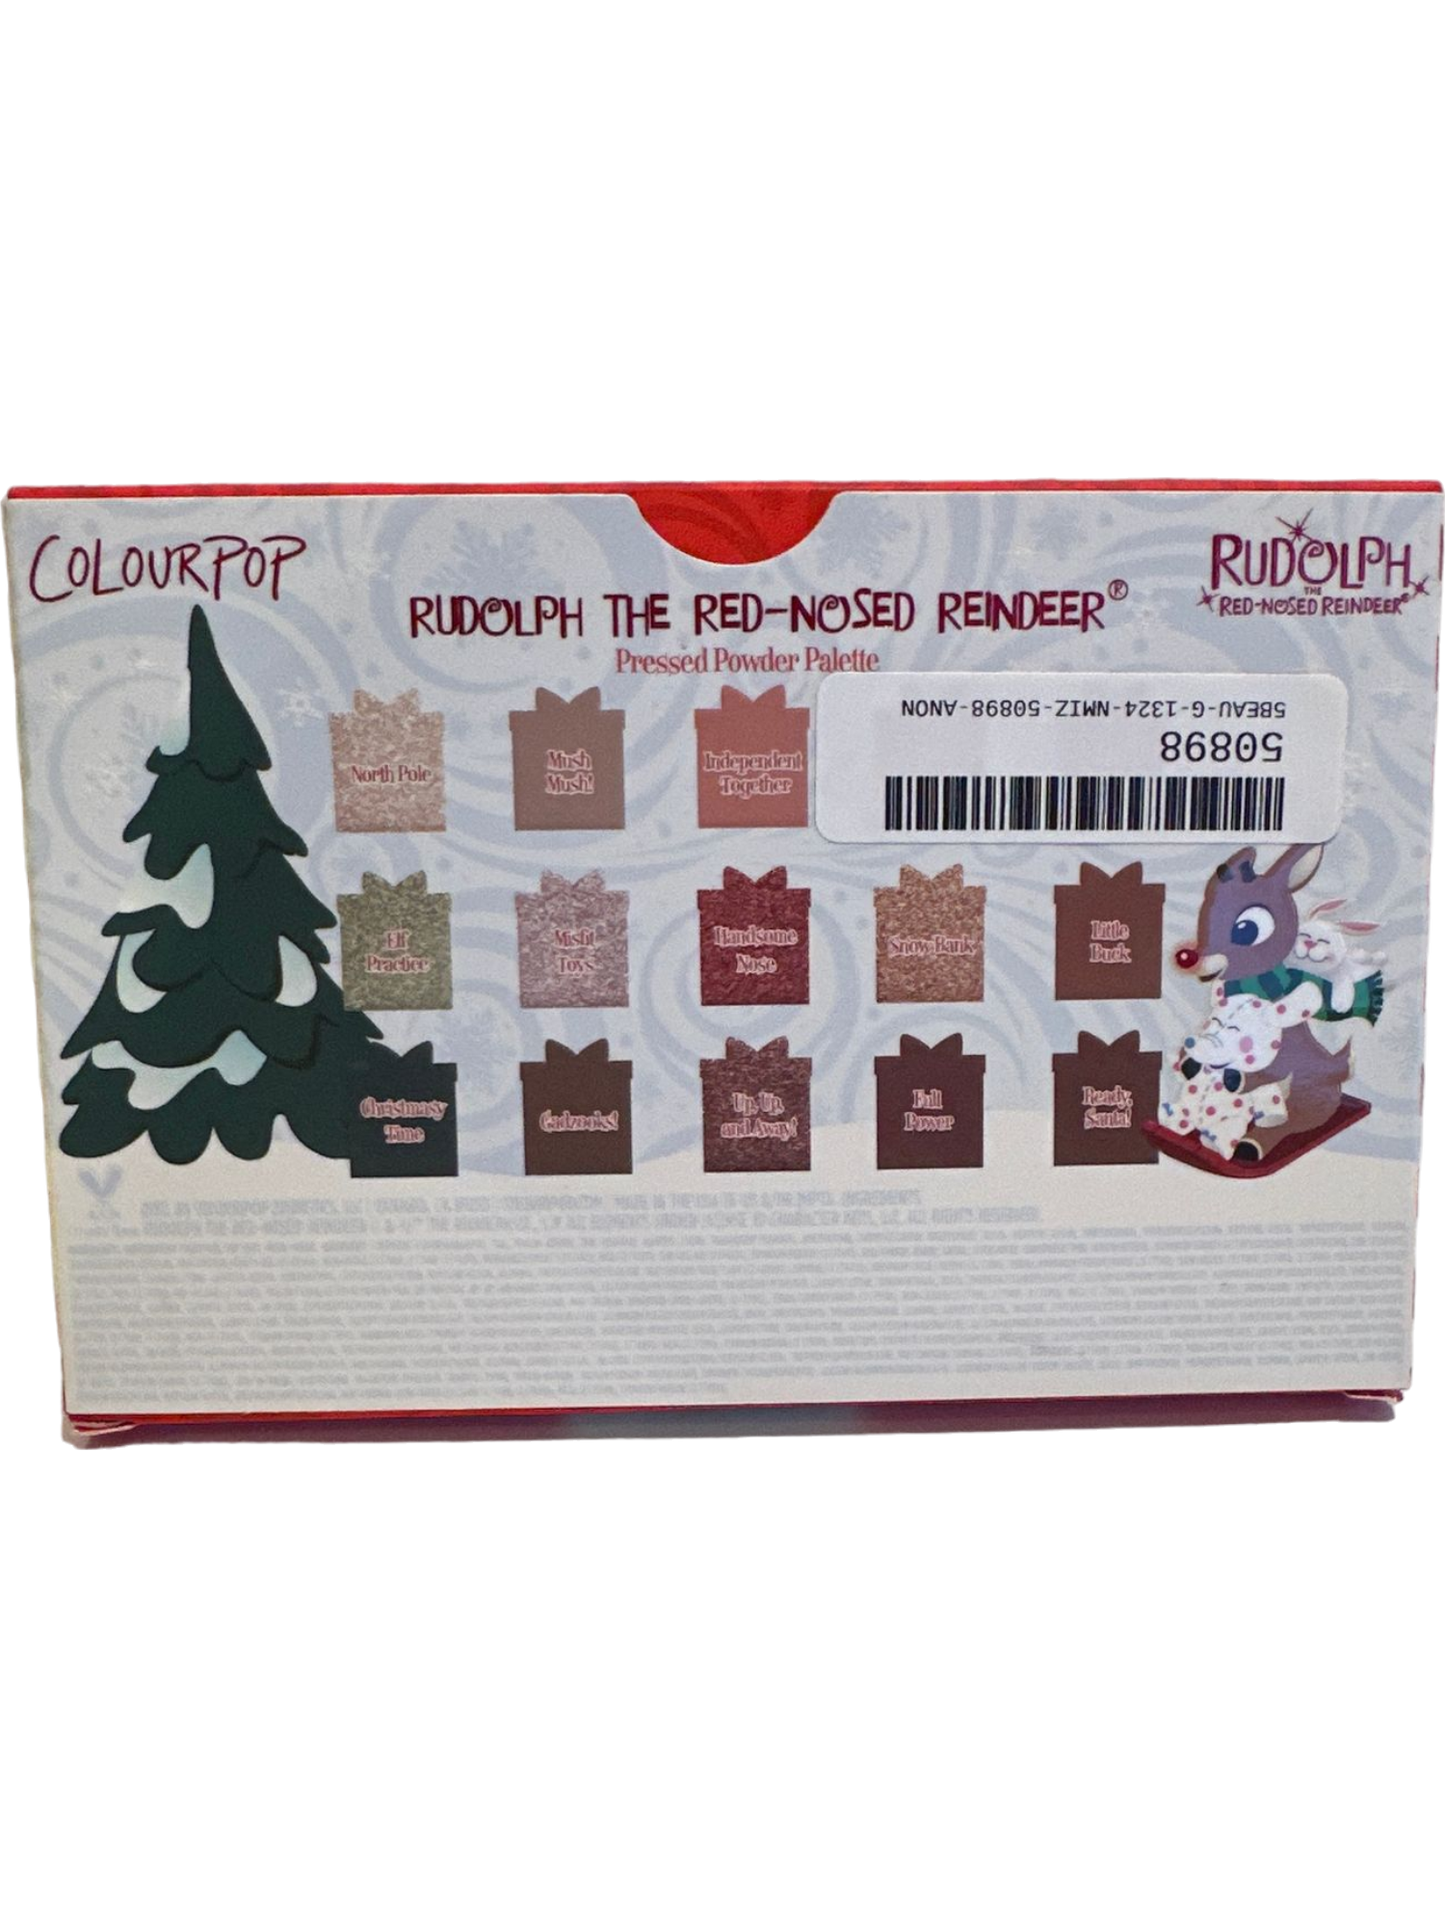 ColourPop Rudolph The Red-Nosed Reindeer Pressed Powder Palette 10.5g